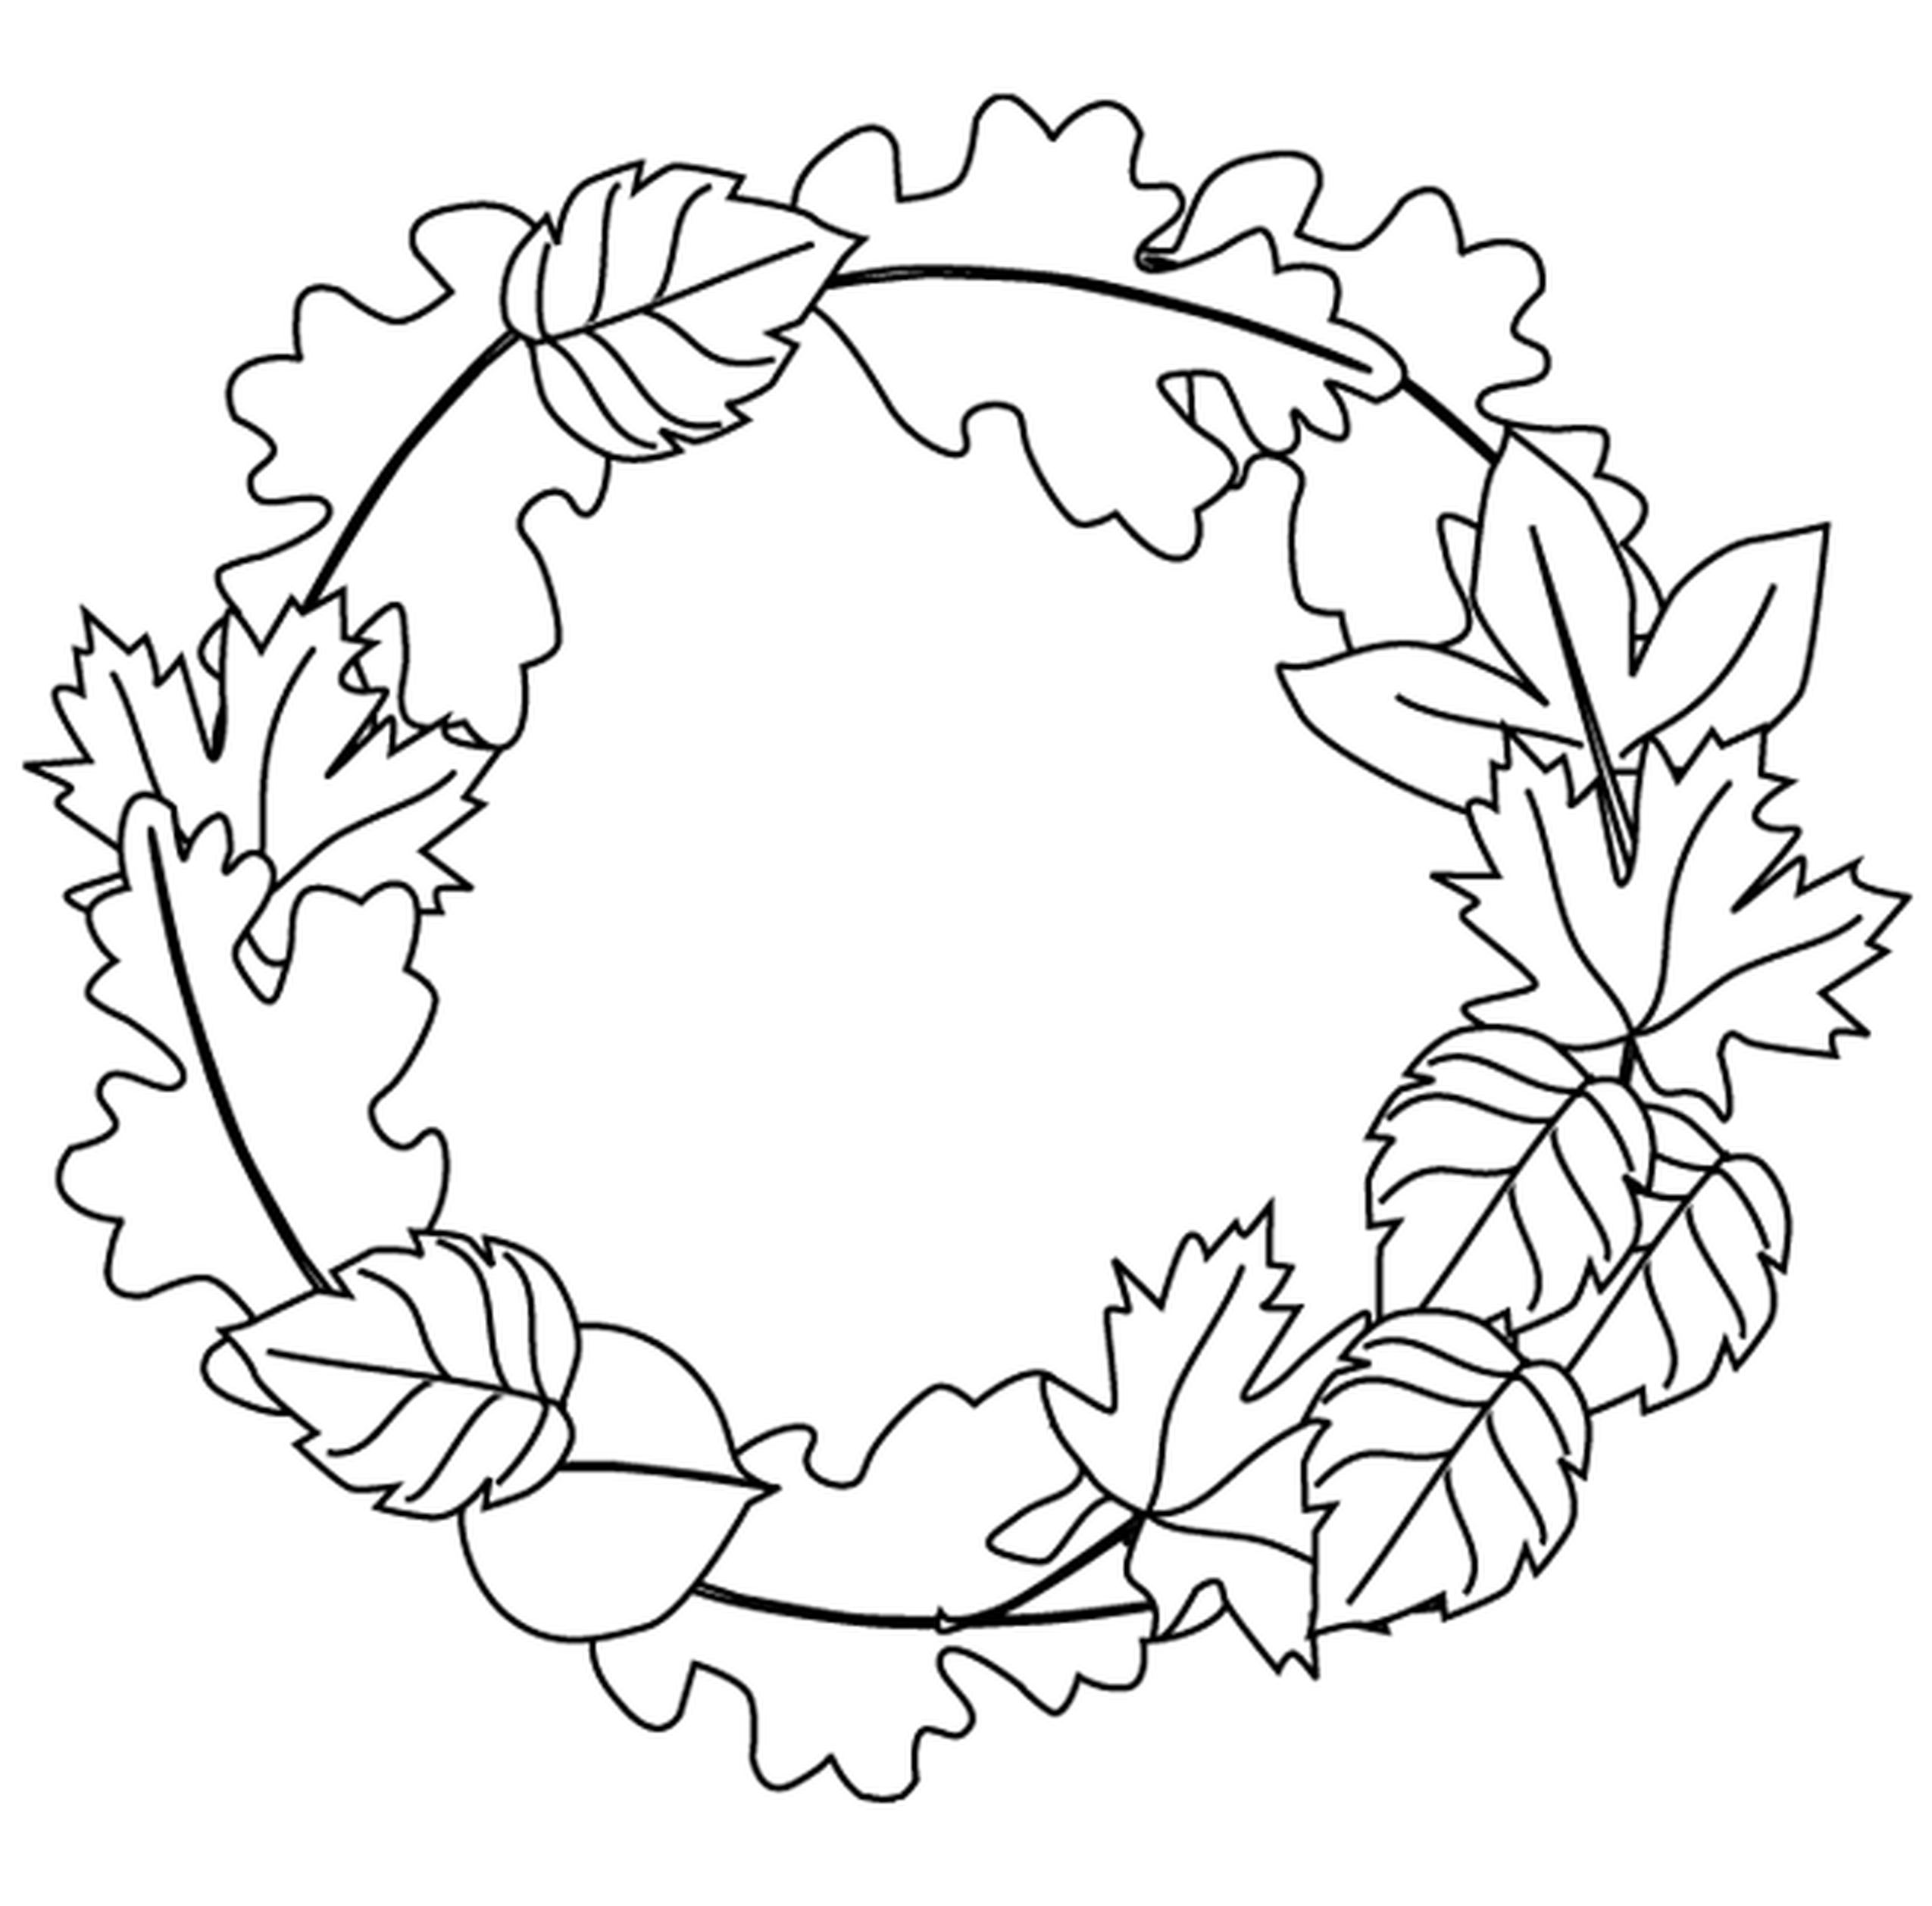 Fall Leaves Coloring Pages - Best Coloring Pages For Kids